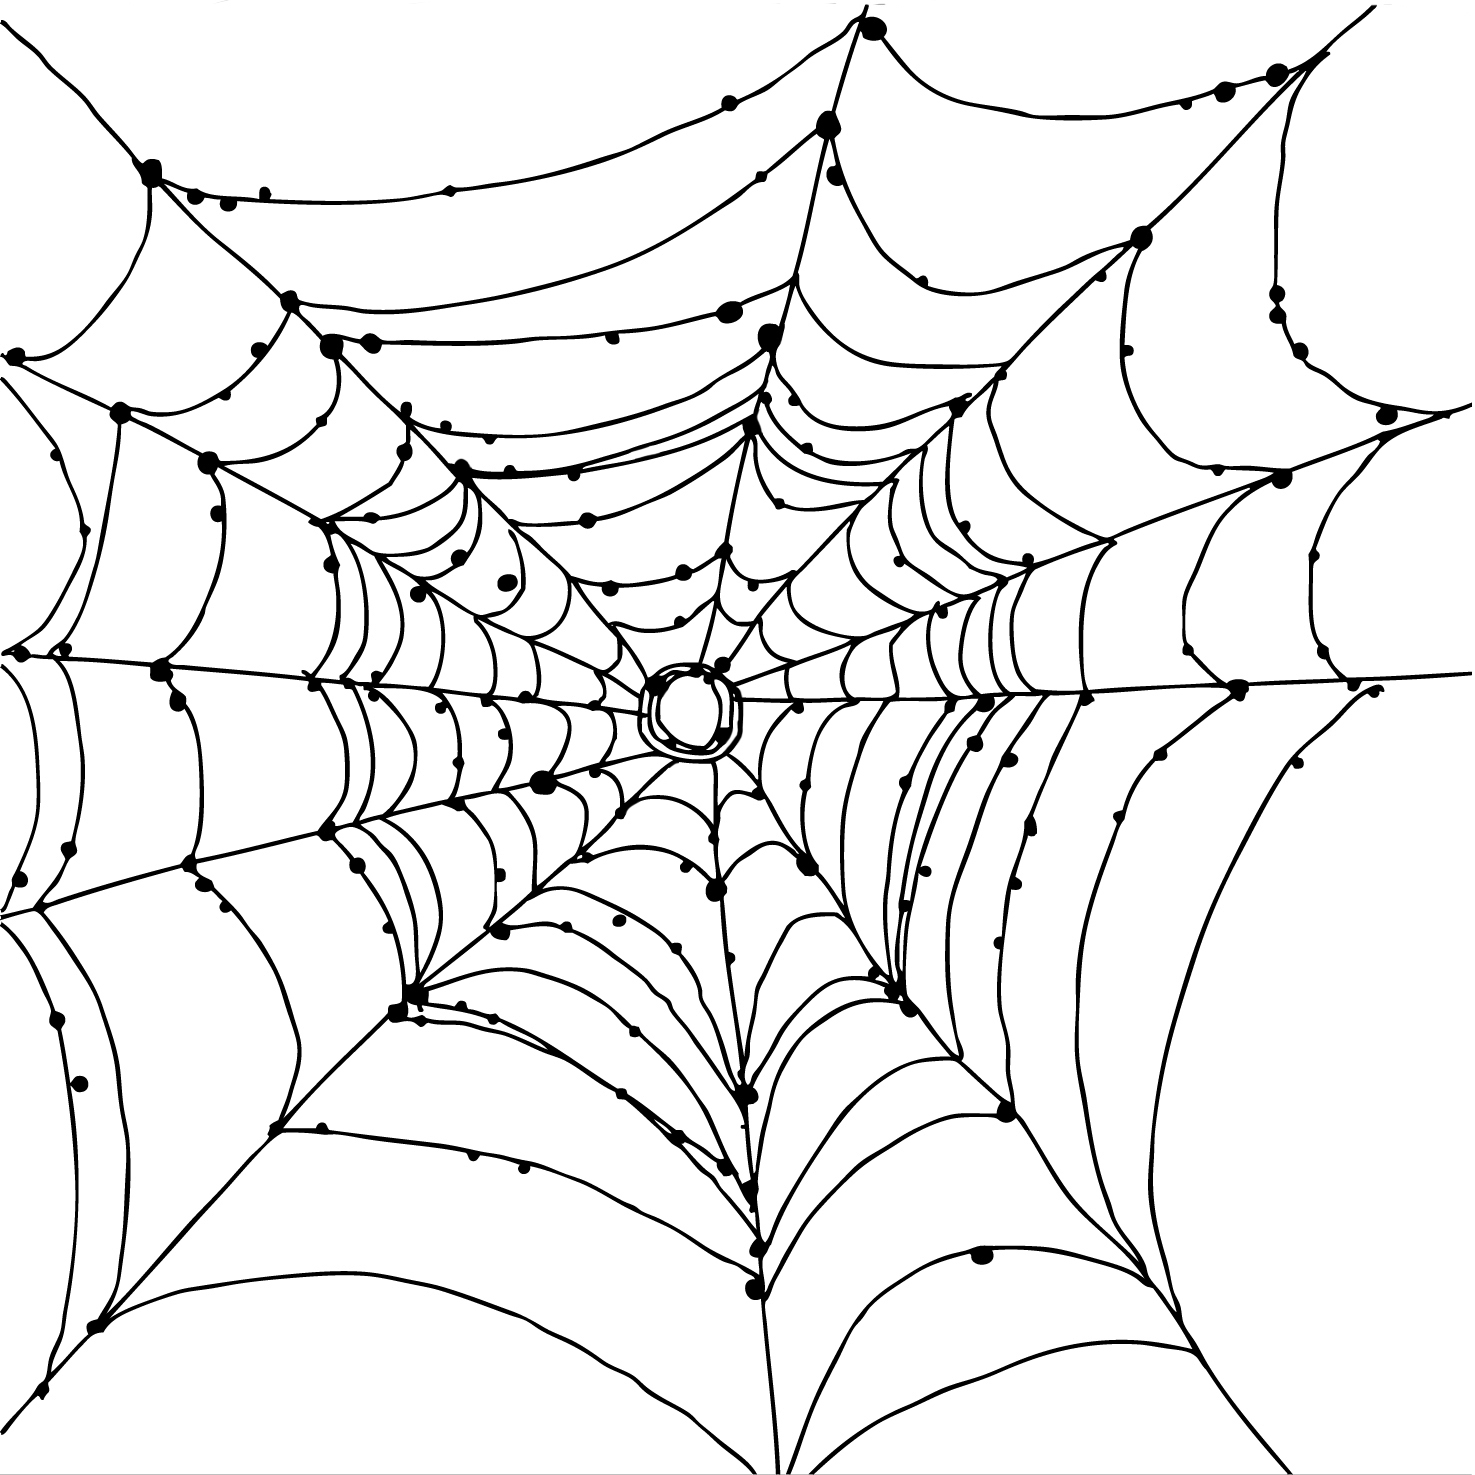 Coloring Pages of Spider Web.